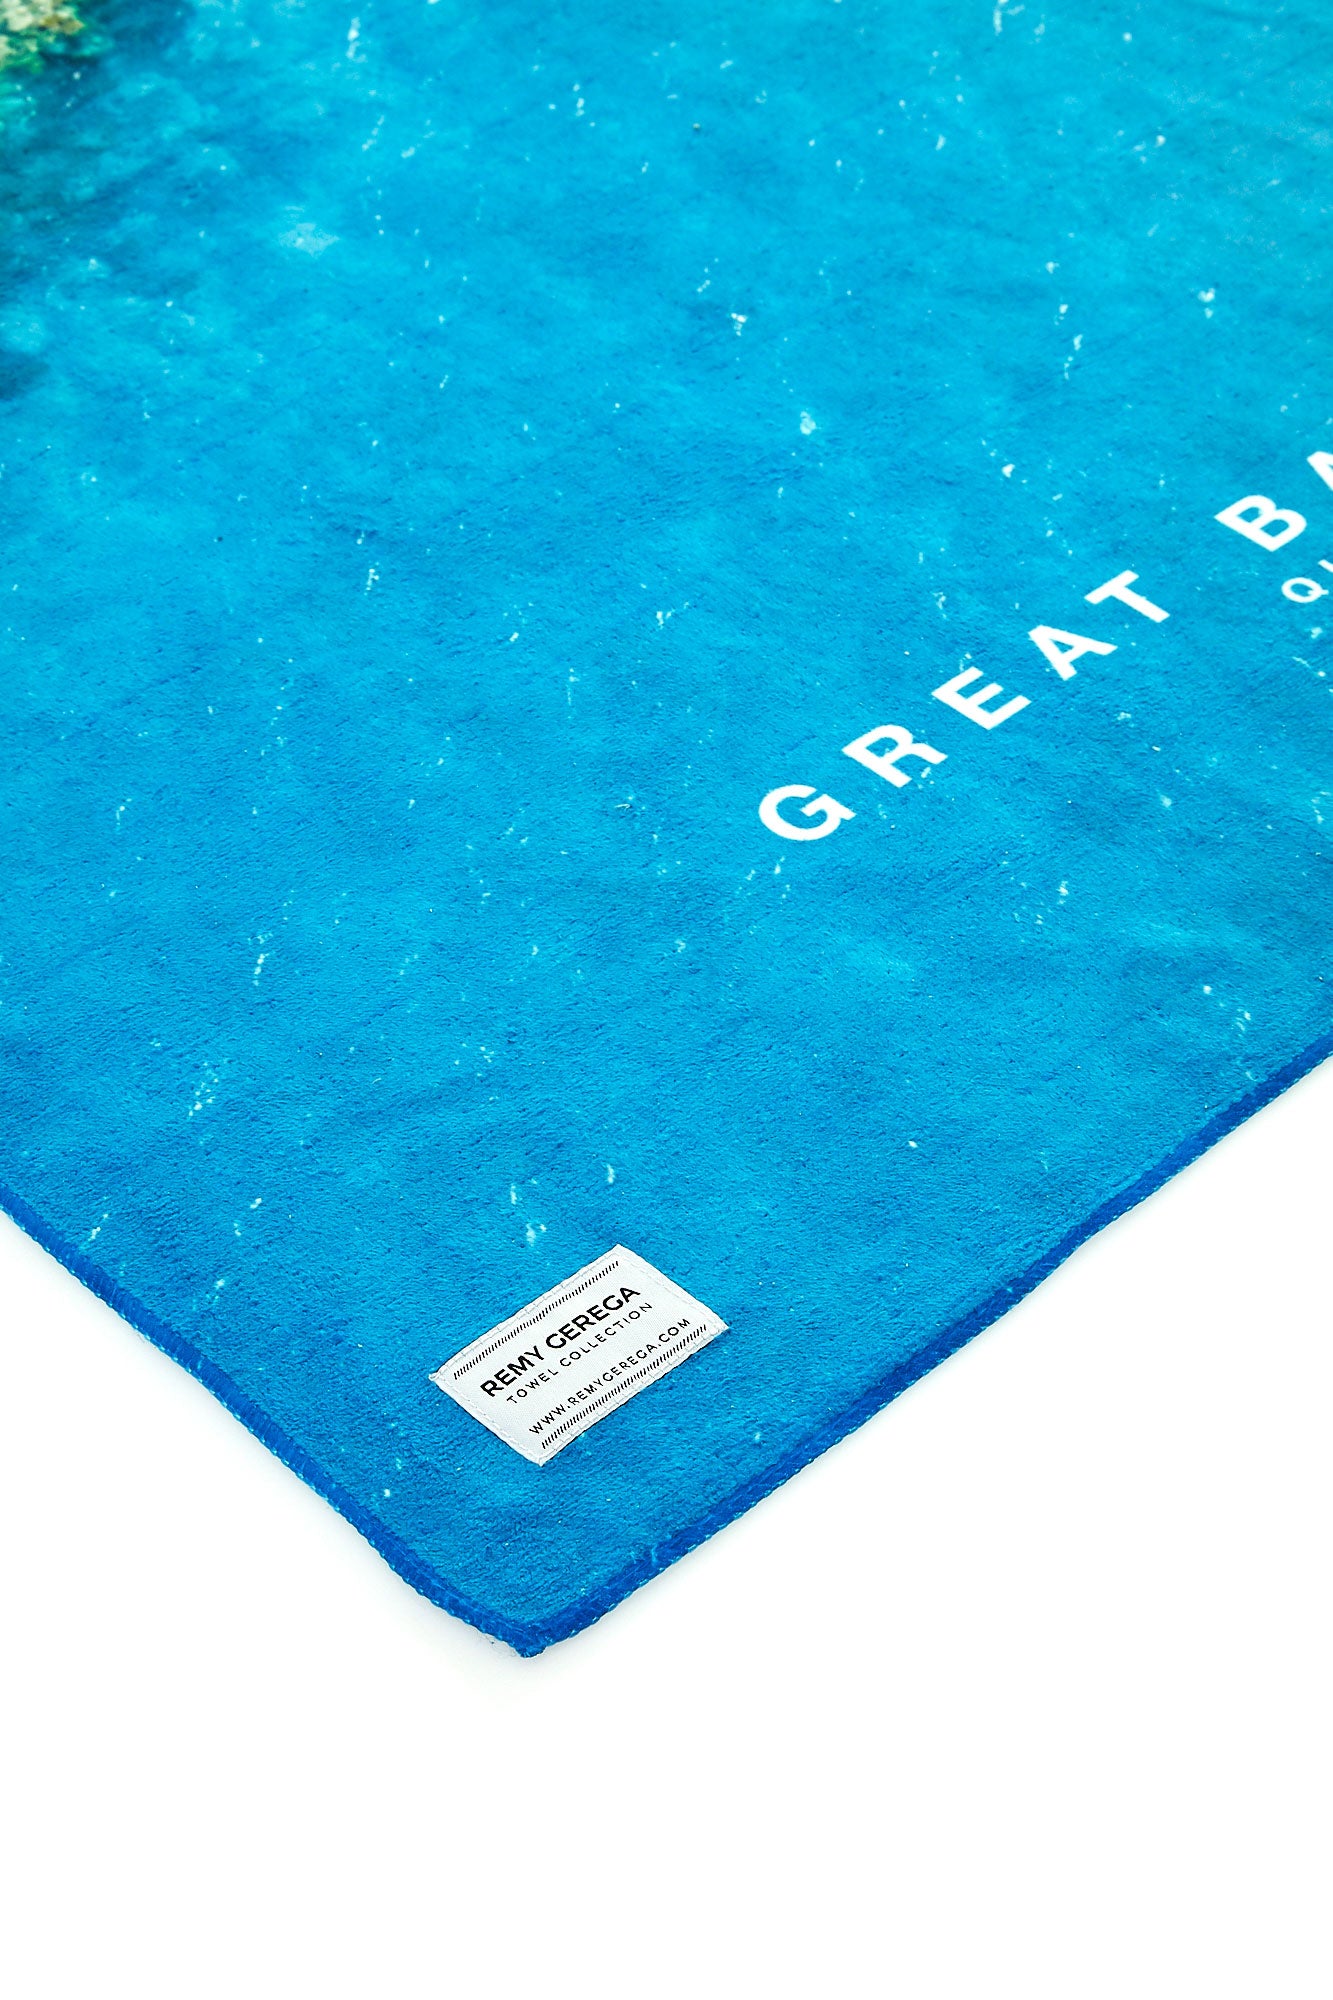 Great Barrier Reef Quick-Dry Beach Towel